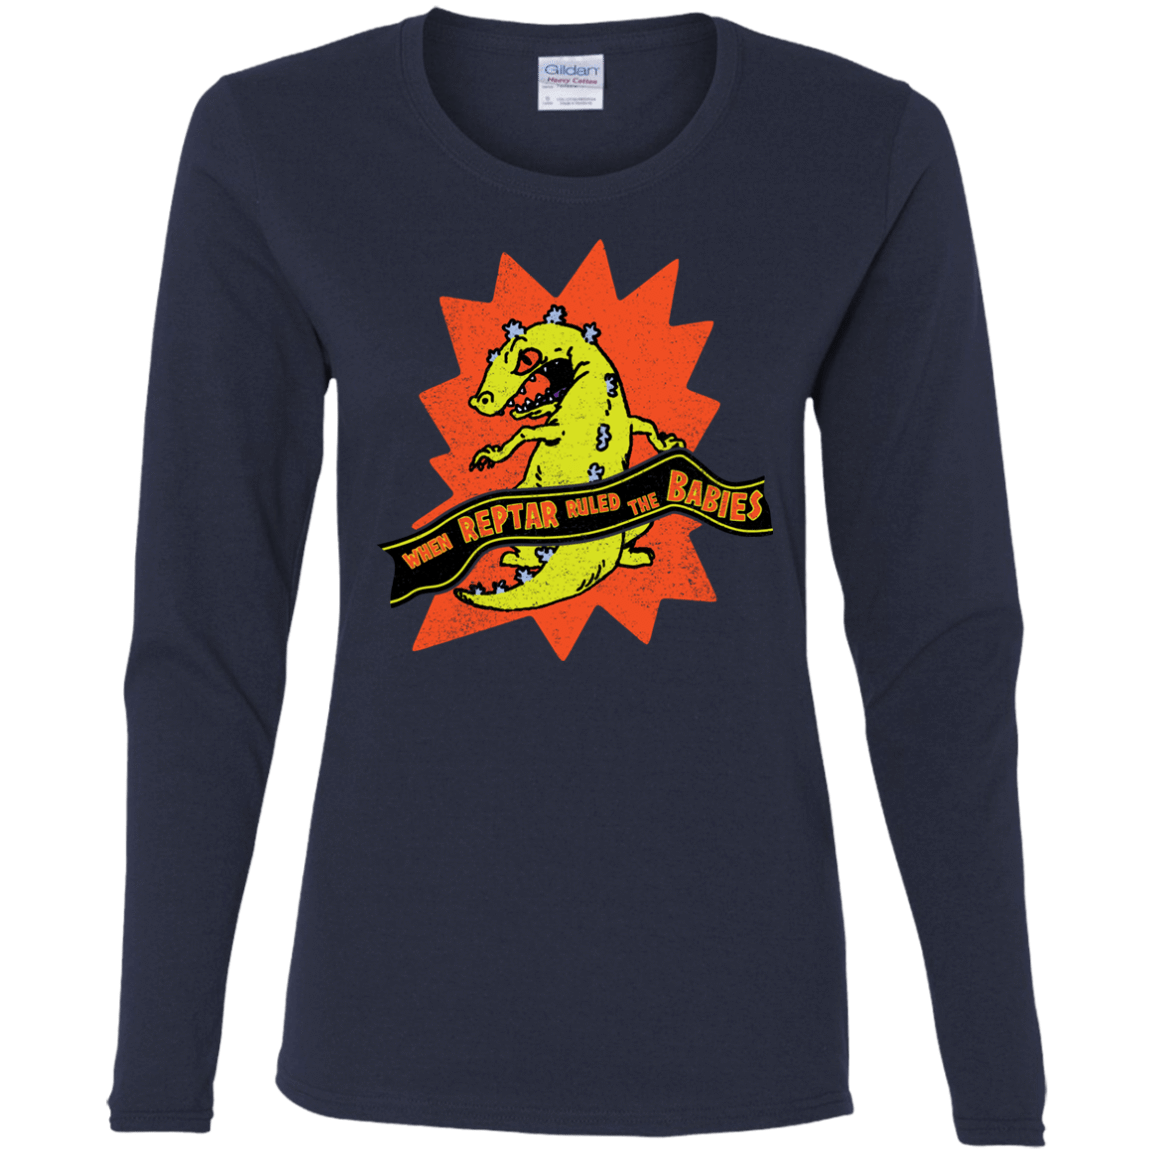 T-Shirts Navy / S When Reptar Ruled The Babies Women's Long Sleeve T-Shirt